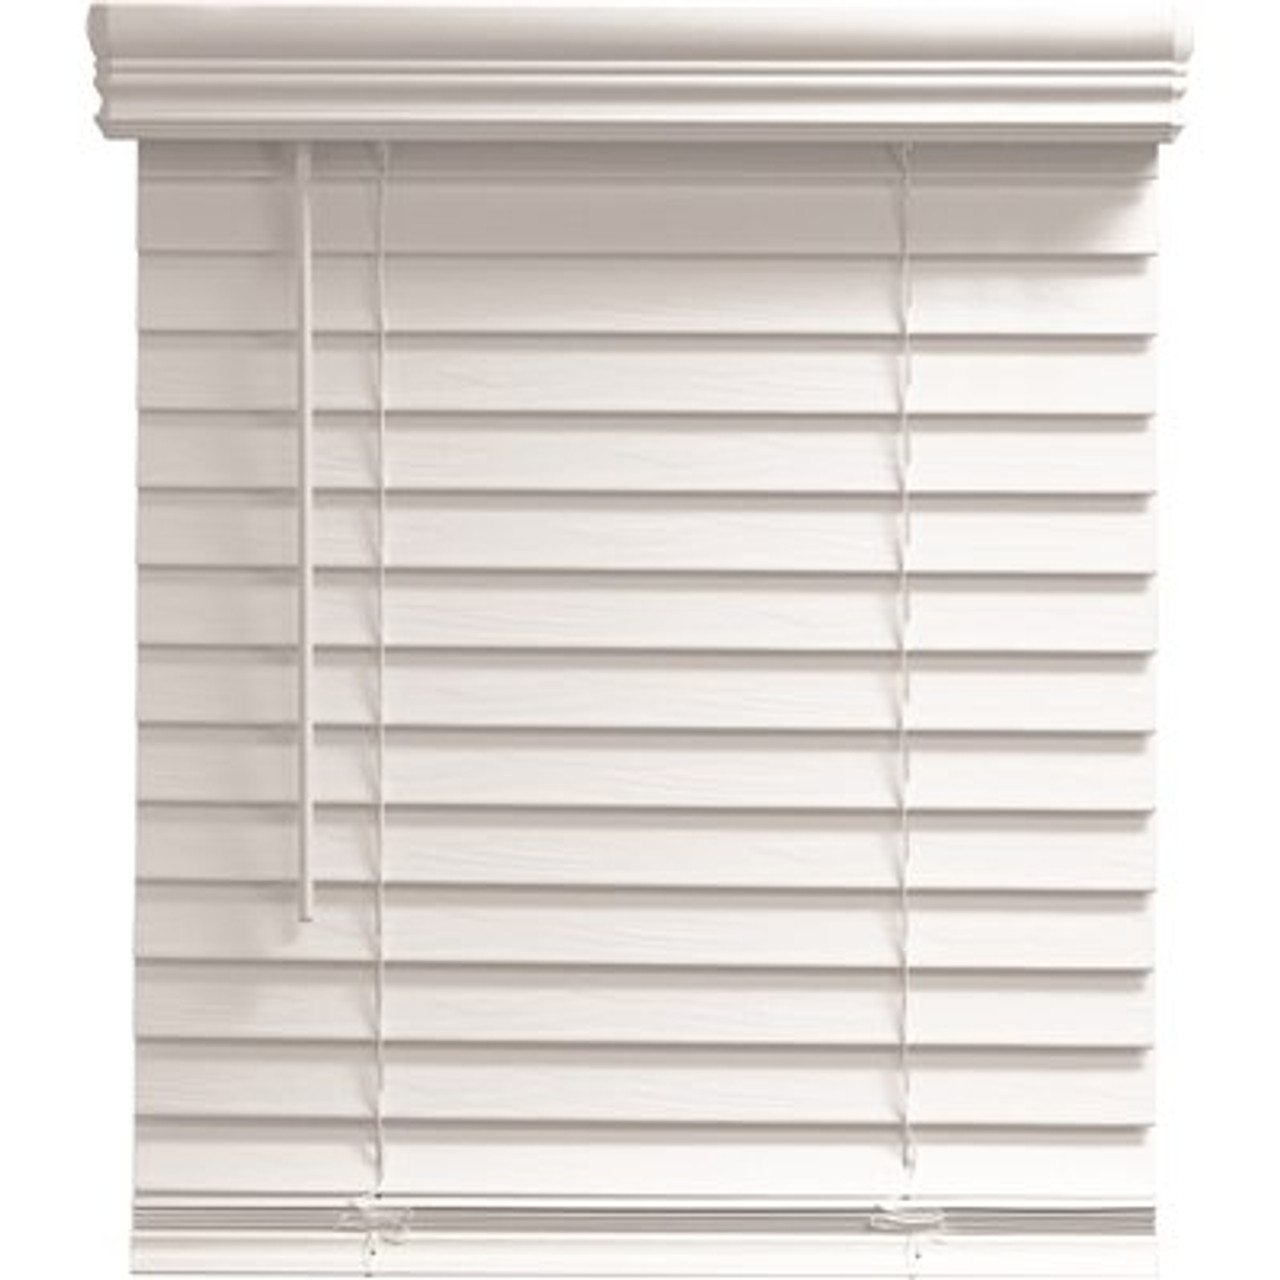 Champion TruTouch 36x96" Cordless 2" Faux Wood Blind White